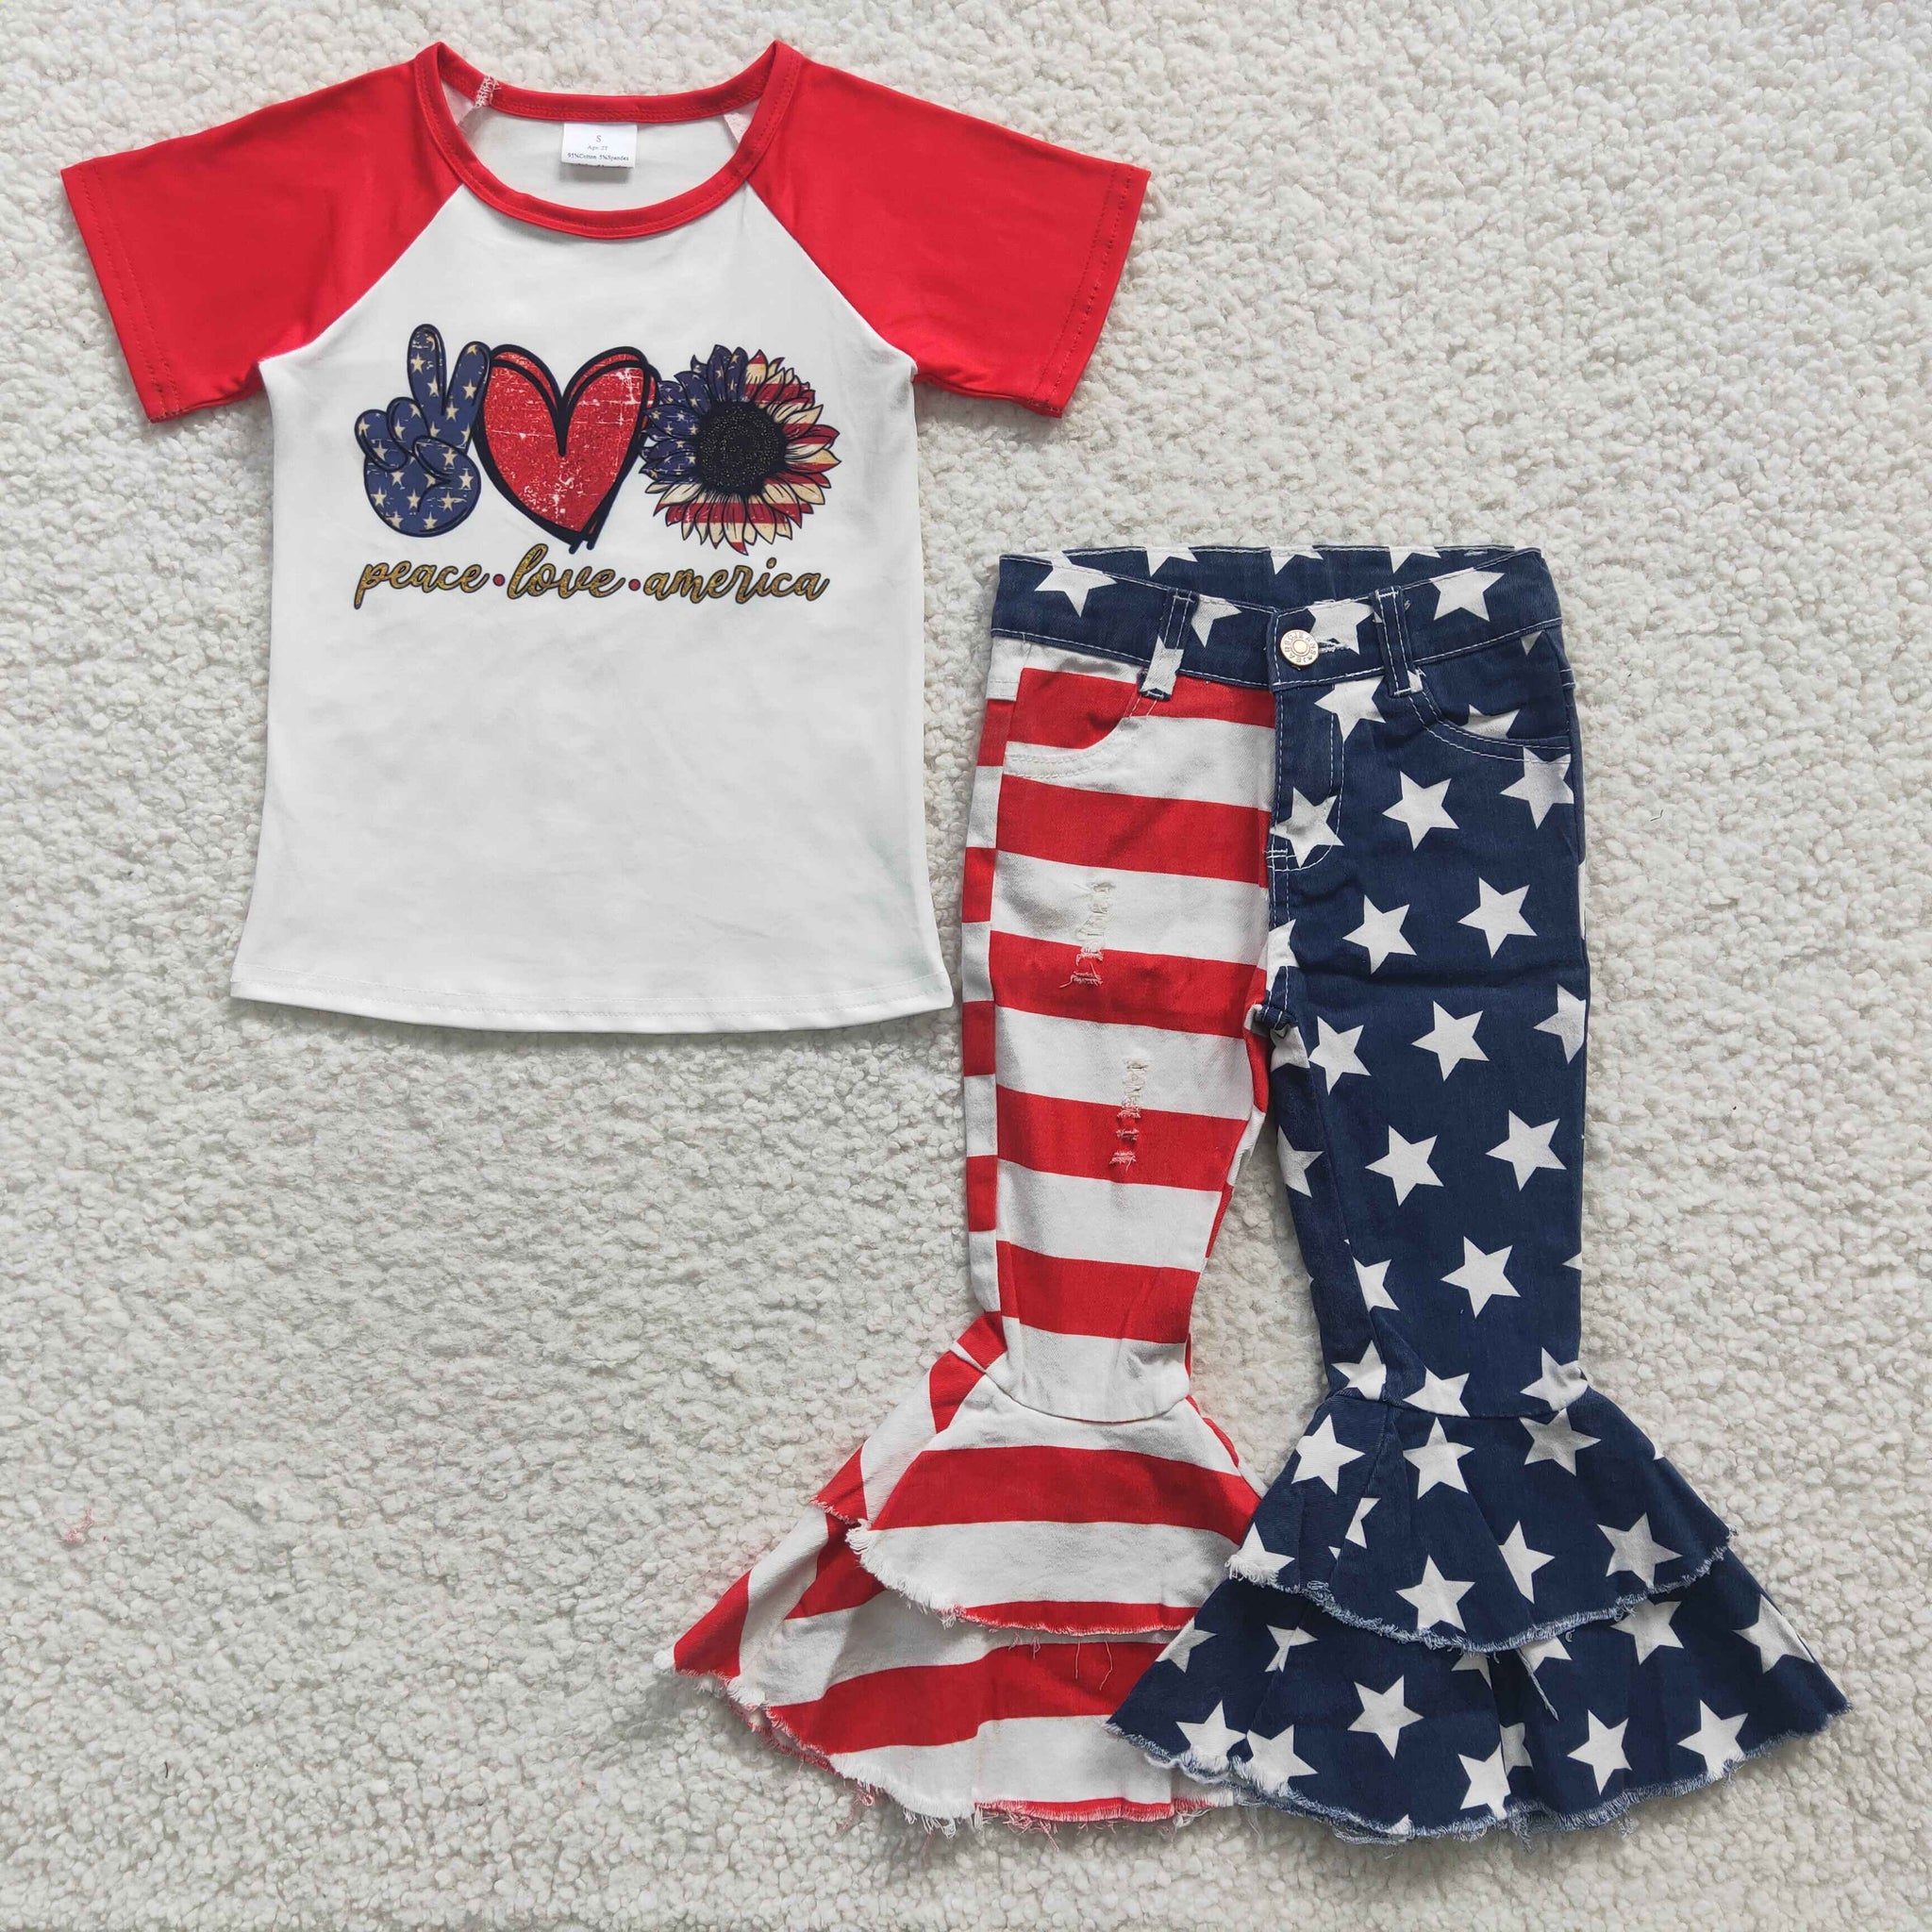 GSPO0567 kids clothes girls 4th of july patriotic bell bottom outfit